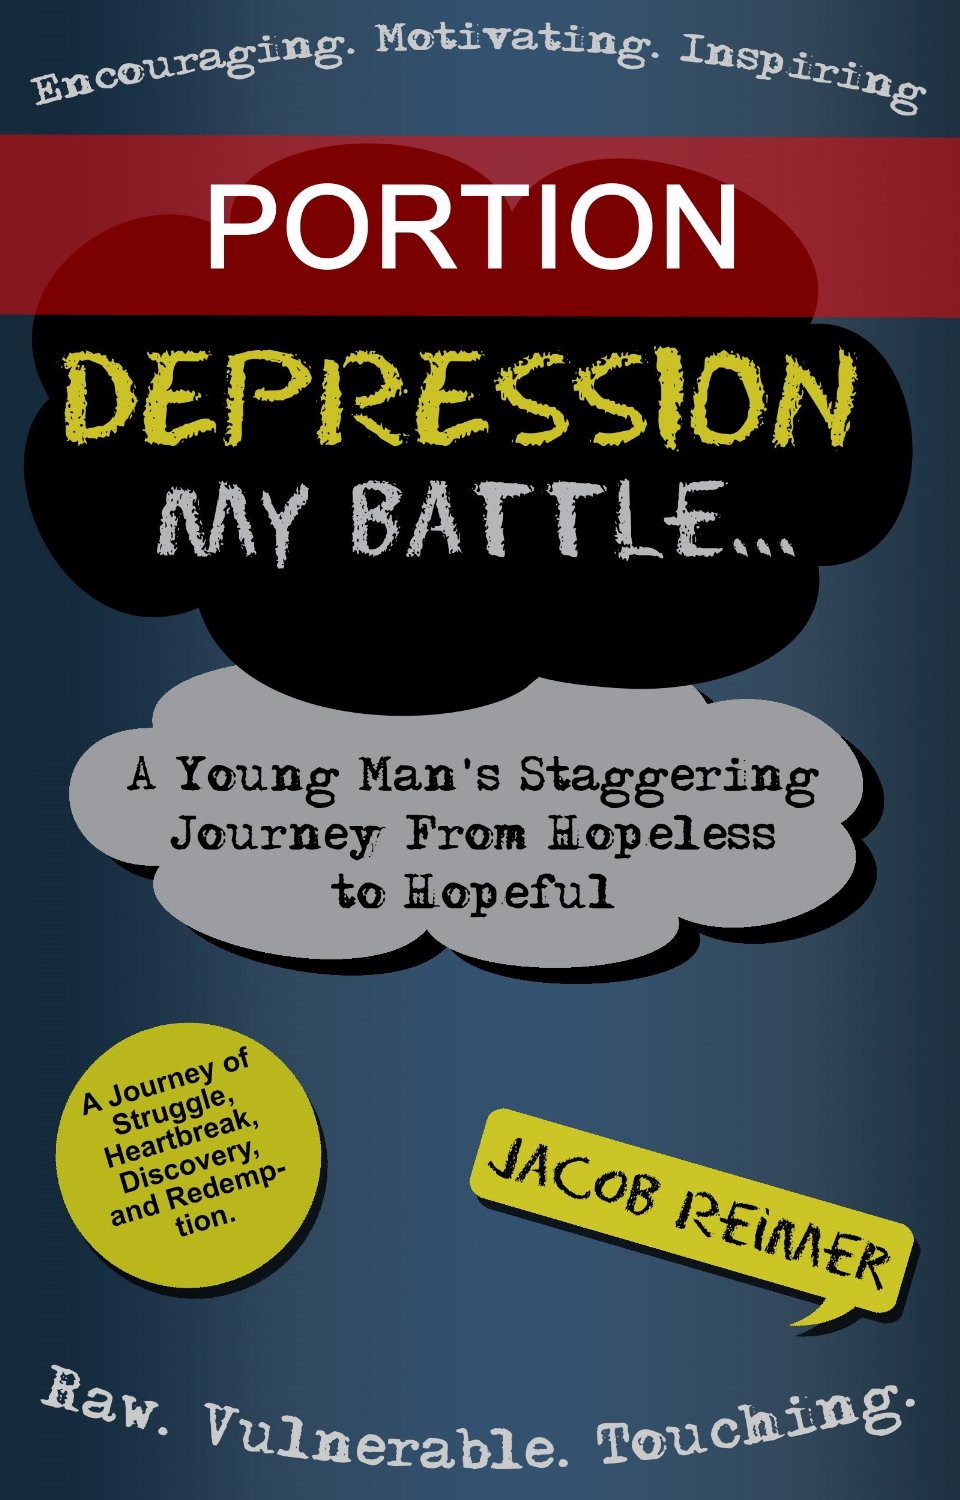 Depression: My Battle – A Young Man’s Staggering Journey From Hopeless To Hopeful by Jacob Reimer